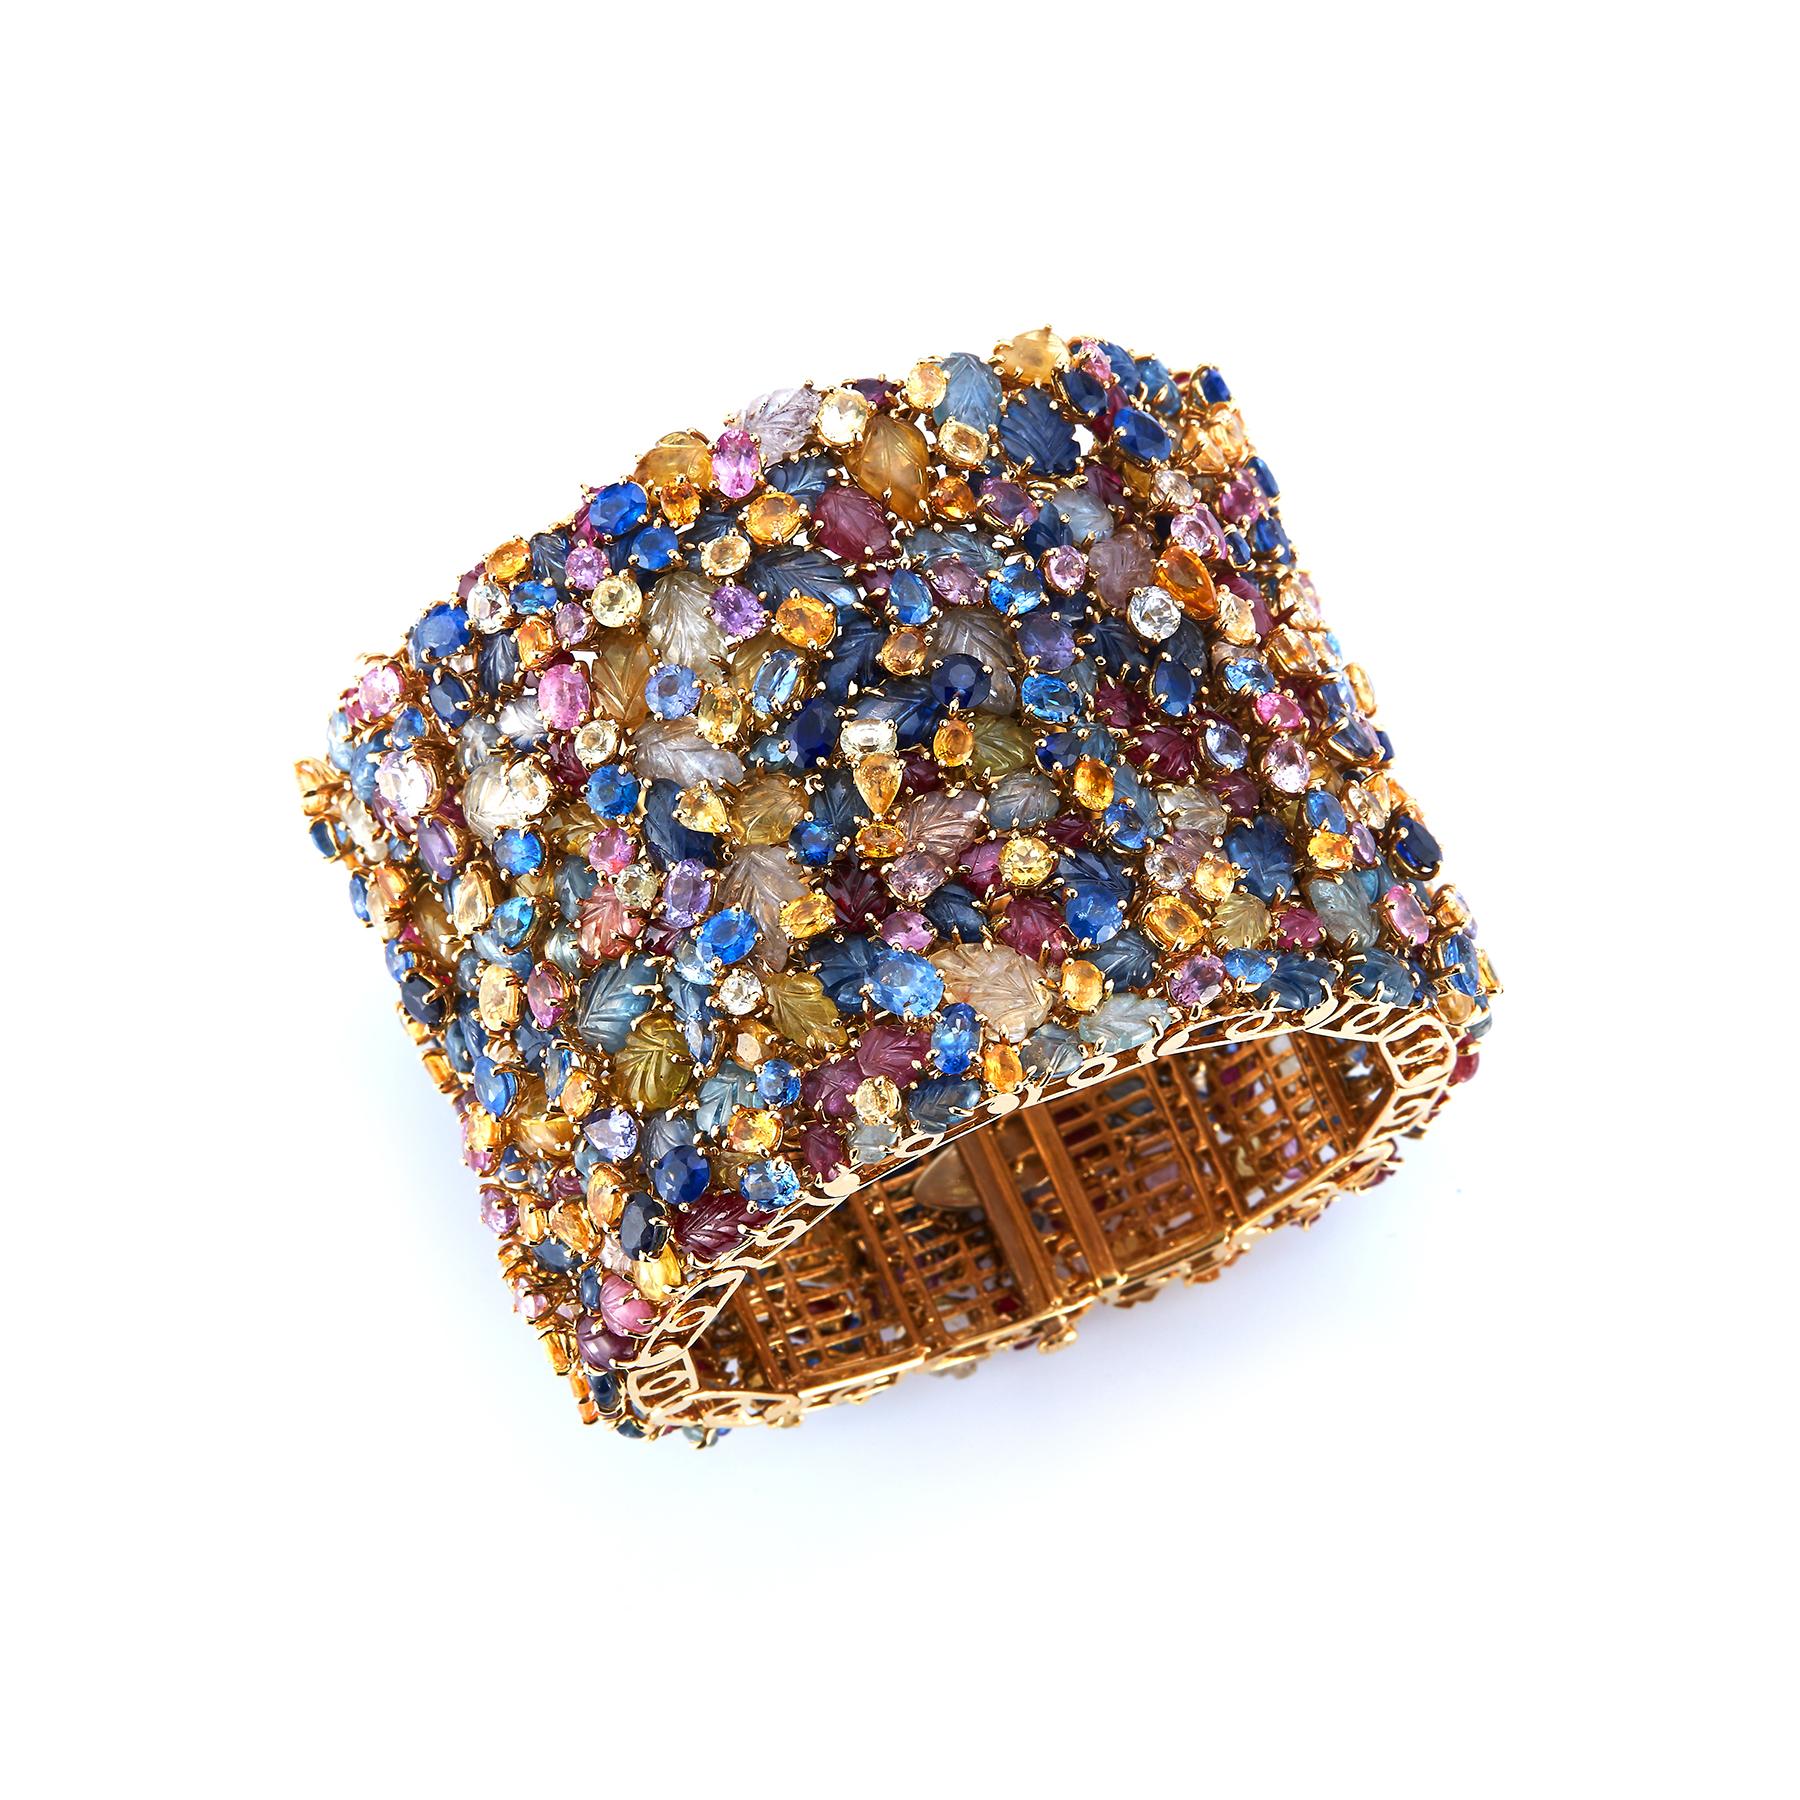 Tony Duquette Multi Color Sapphire Bracelet 
This bracelet consists of variously-shaped faceted and carved colored sapphires including hues of blue, yellow, pink, carved rubies.
18k Yellow Gold.
Signed Tony Duquette.
Size/Dimensions: Approximately